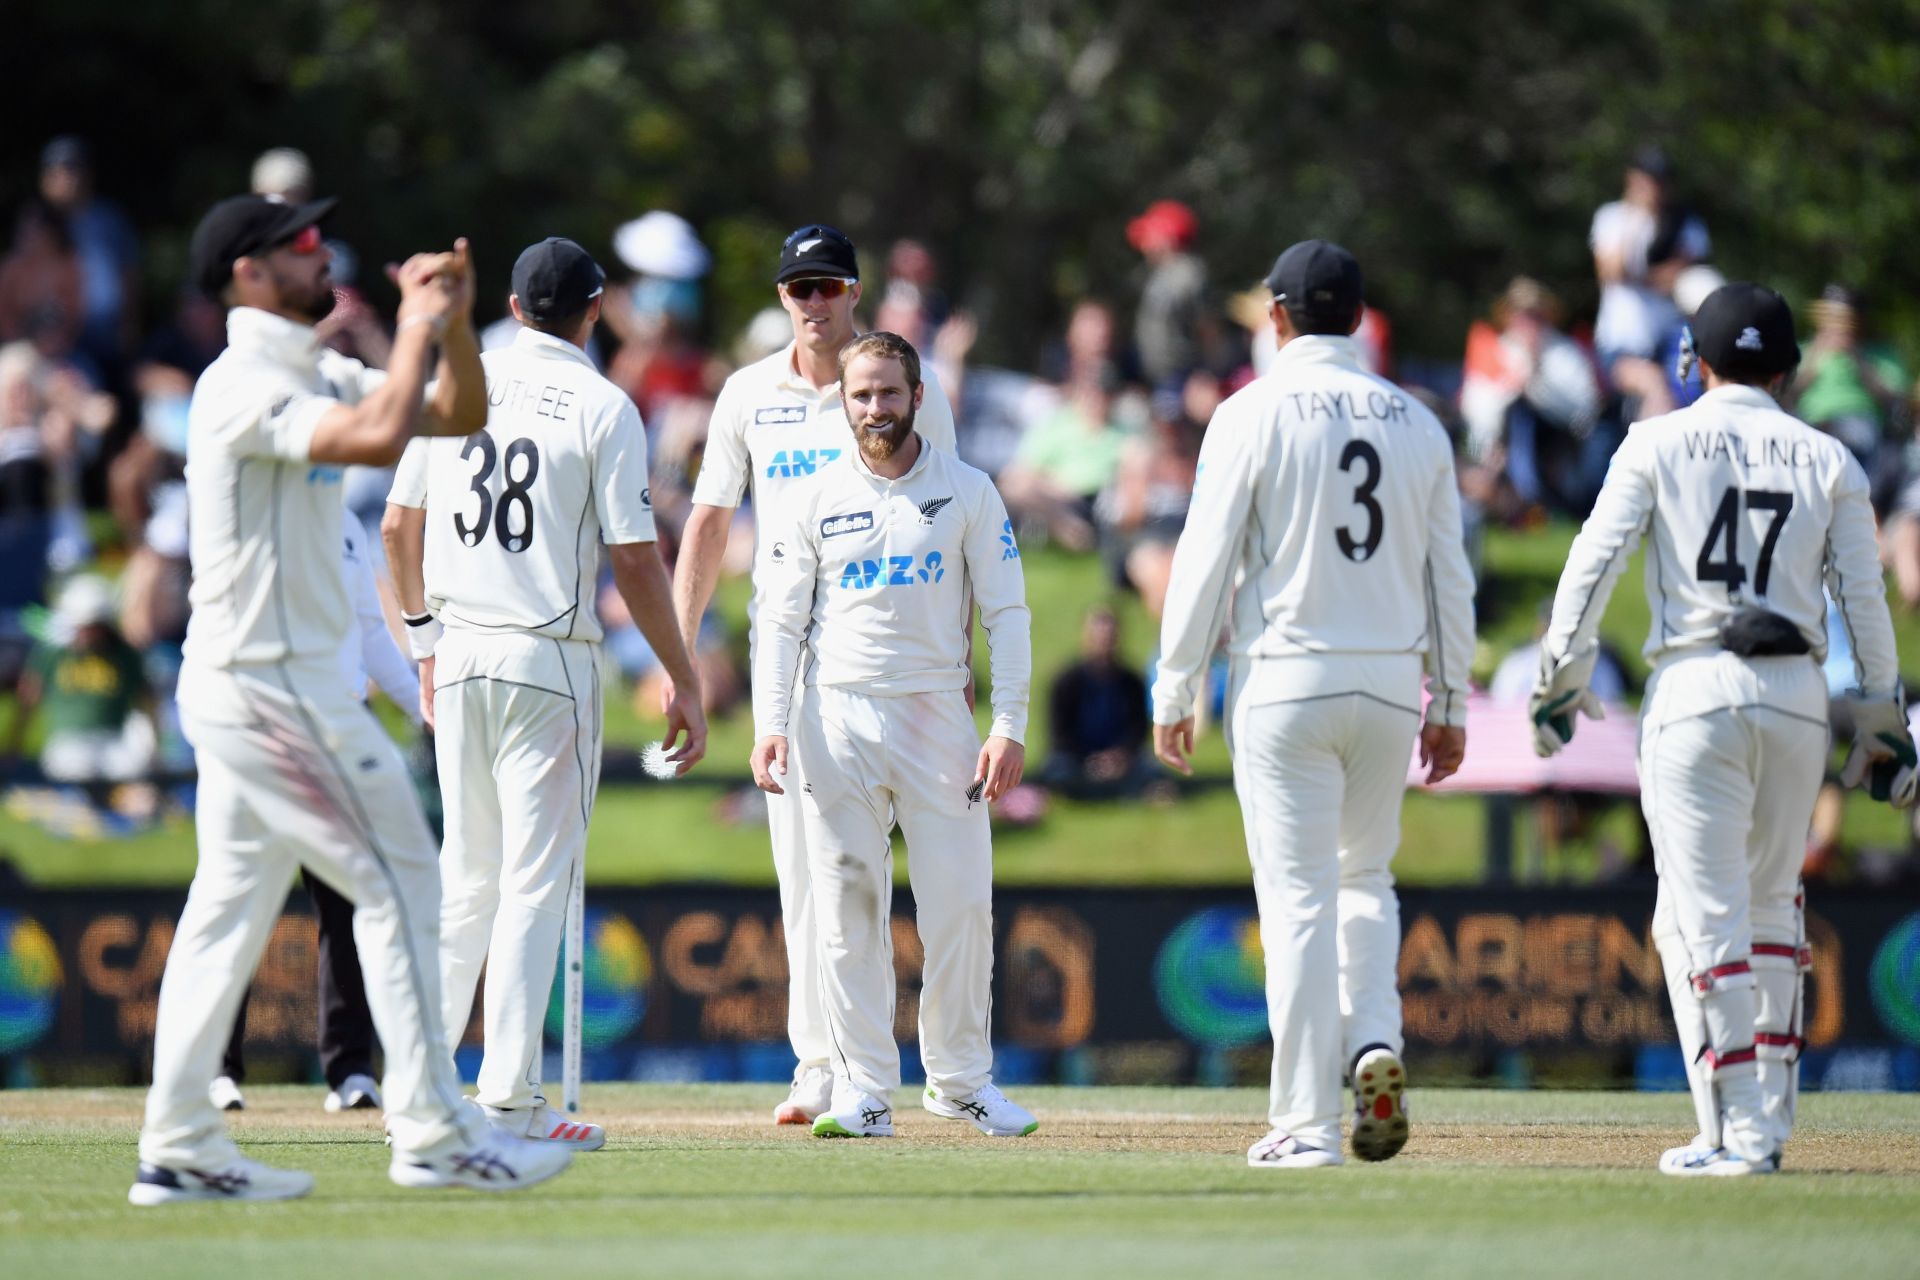 New Zealand team hit 22 sixes in an innings against Pakistan